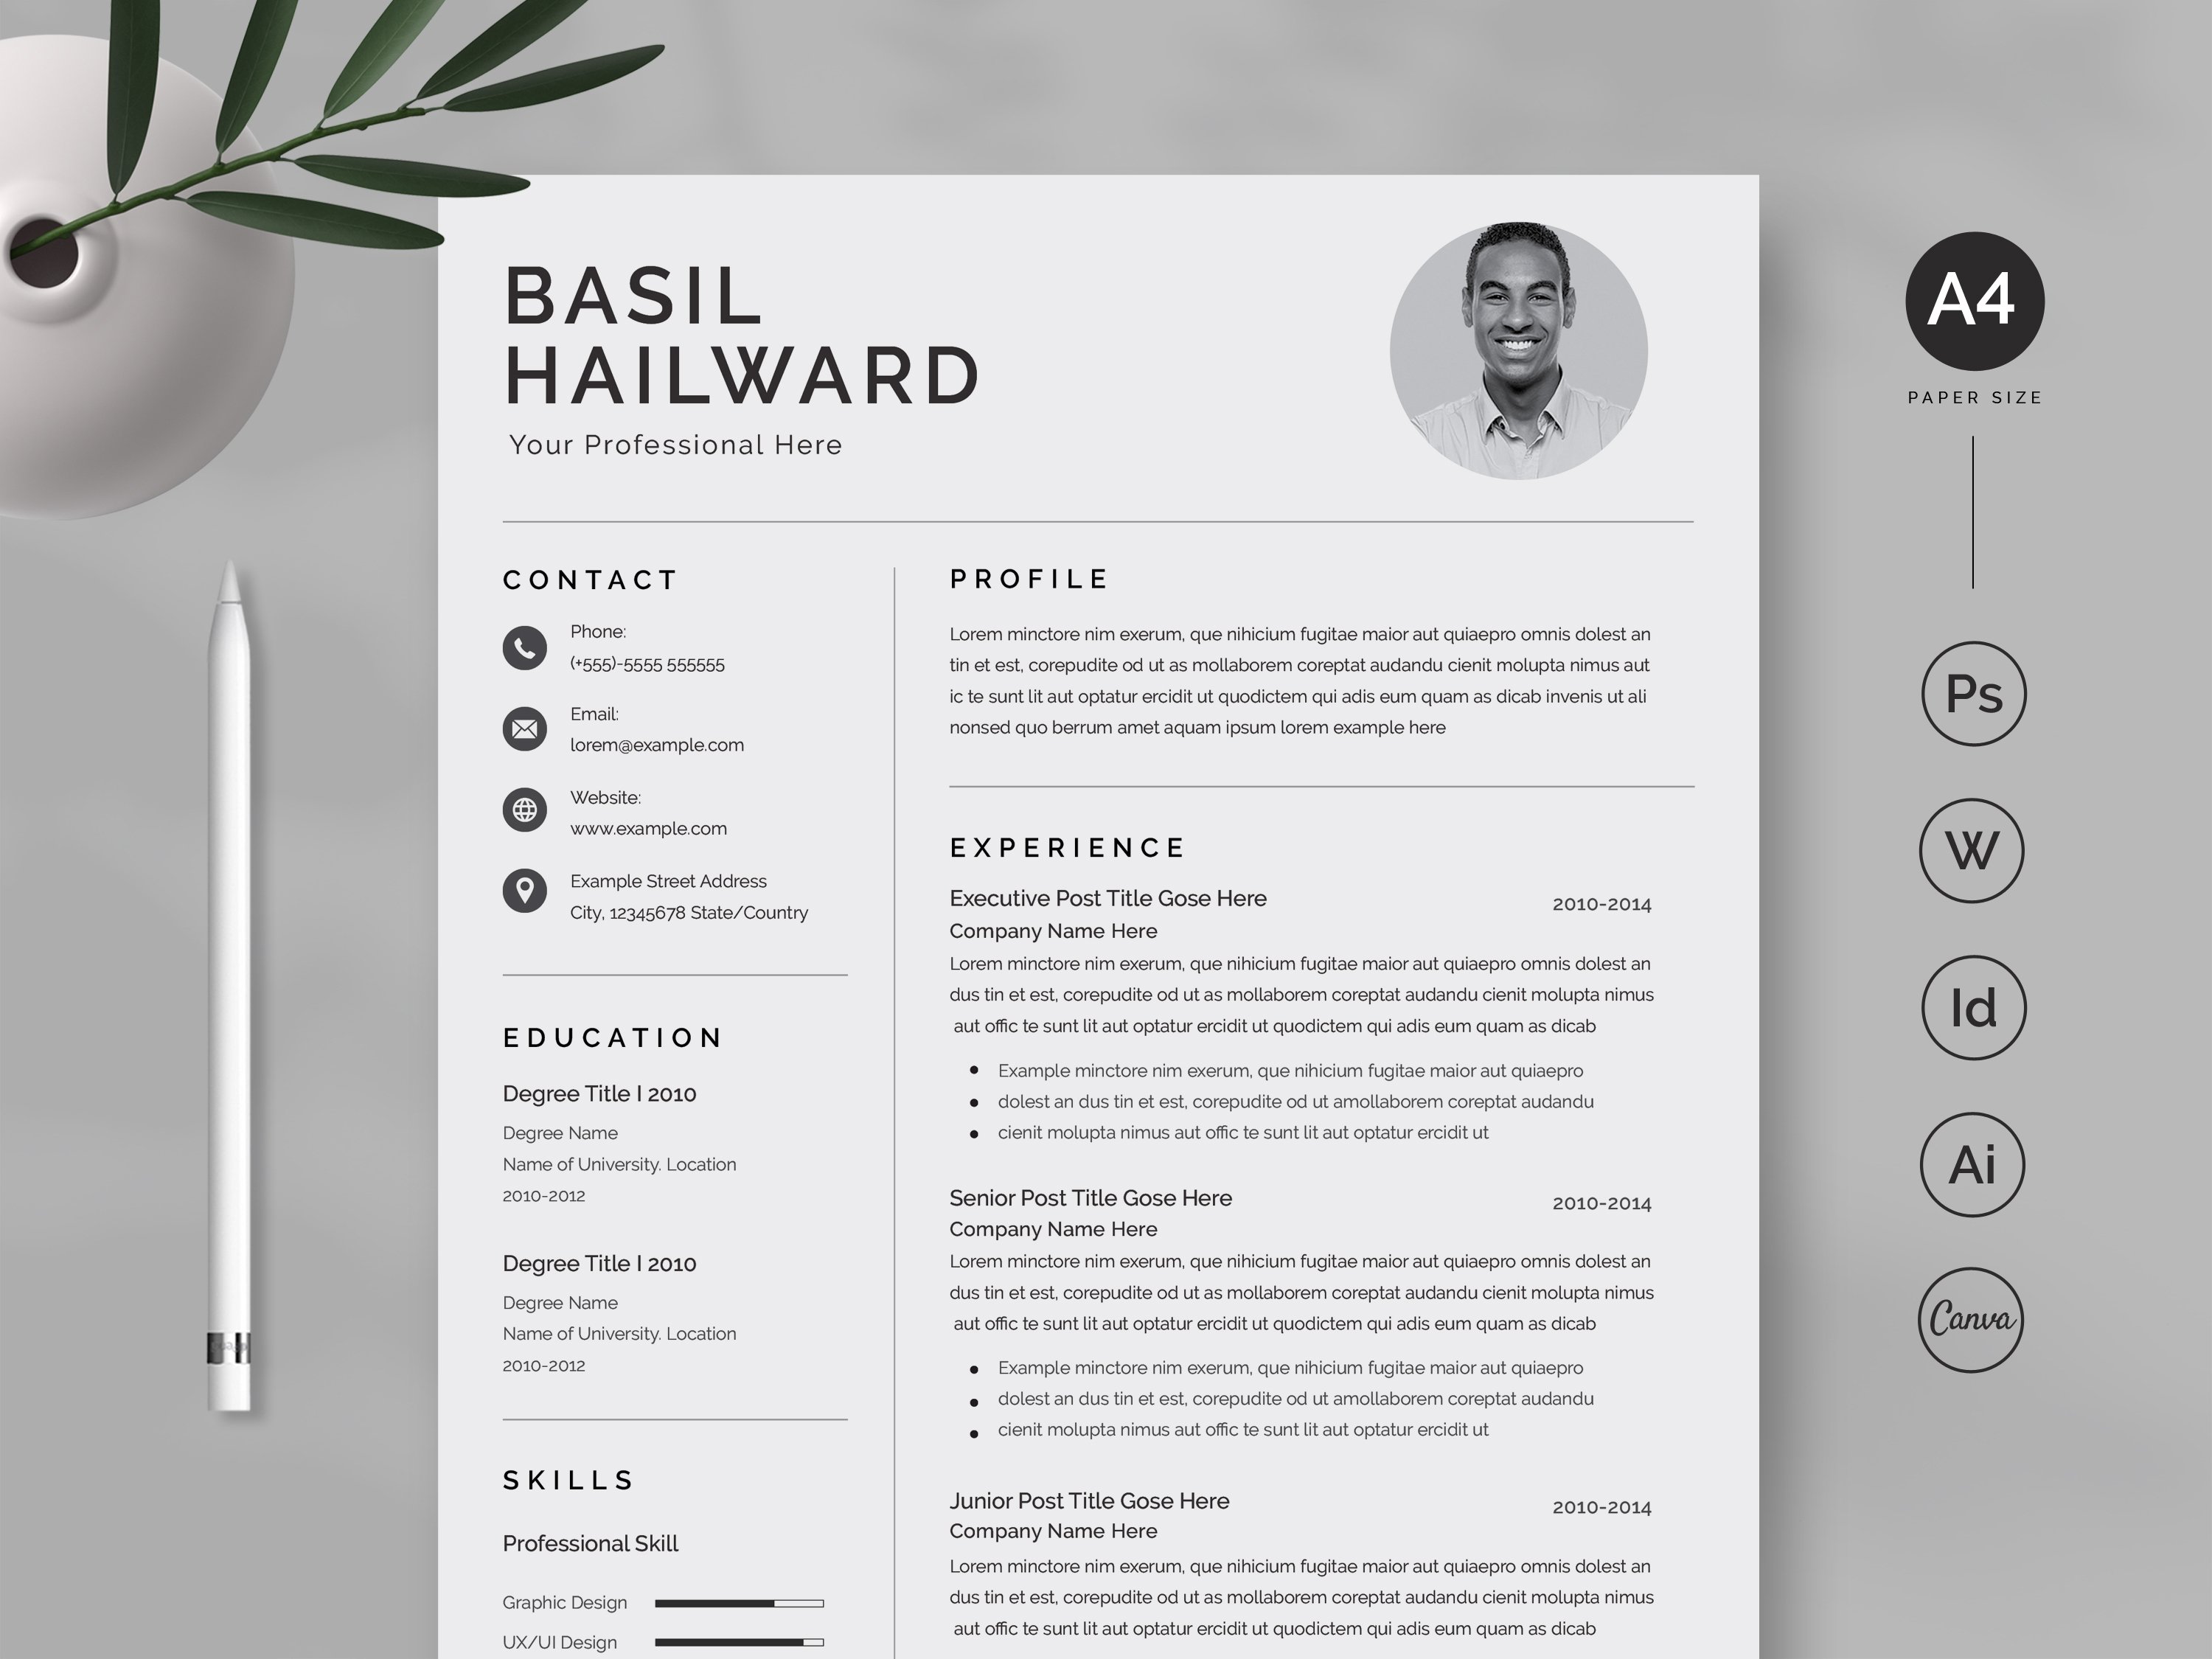 Canva Resume Template / CV cover image.